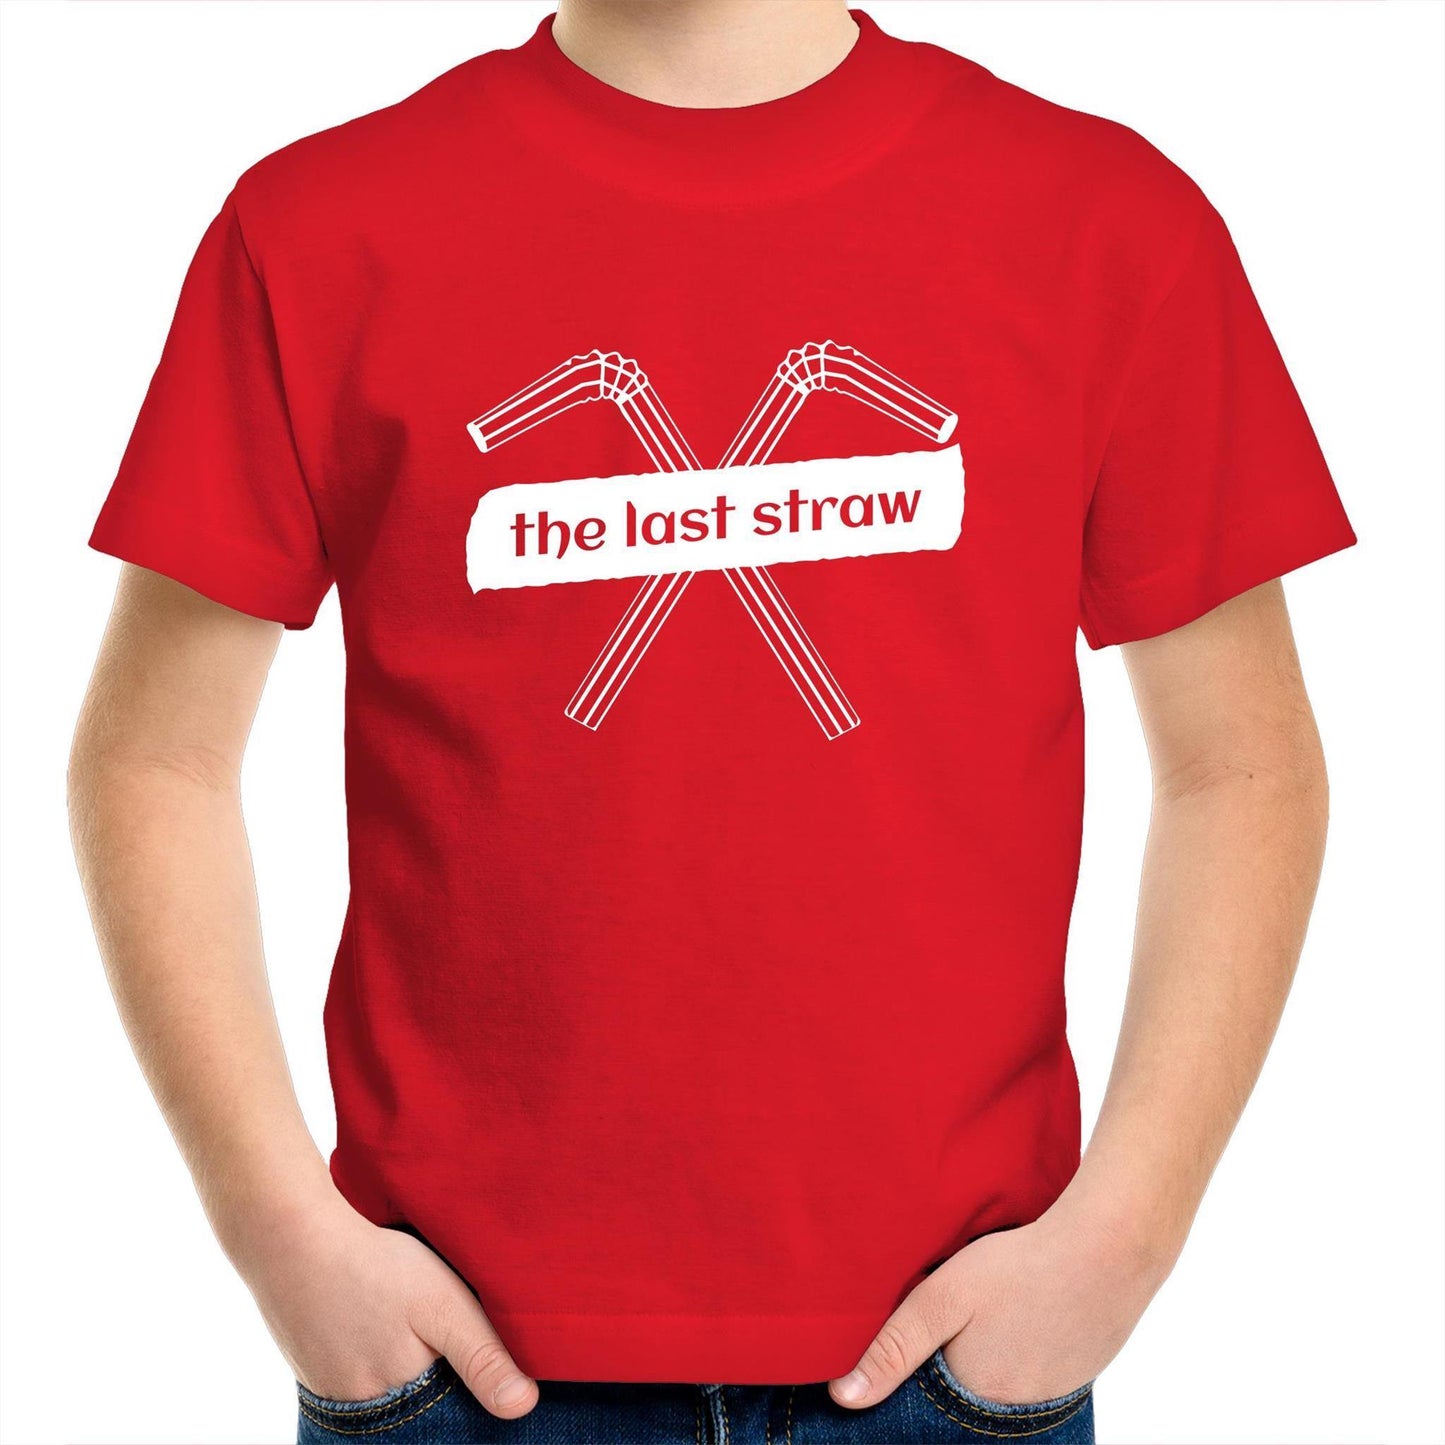 The Last Straw - Kids Youth Crew T-Shirt Red Kids Youth T-shirt Environment